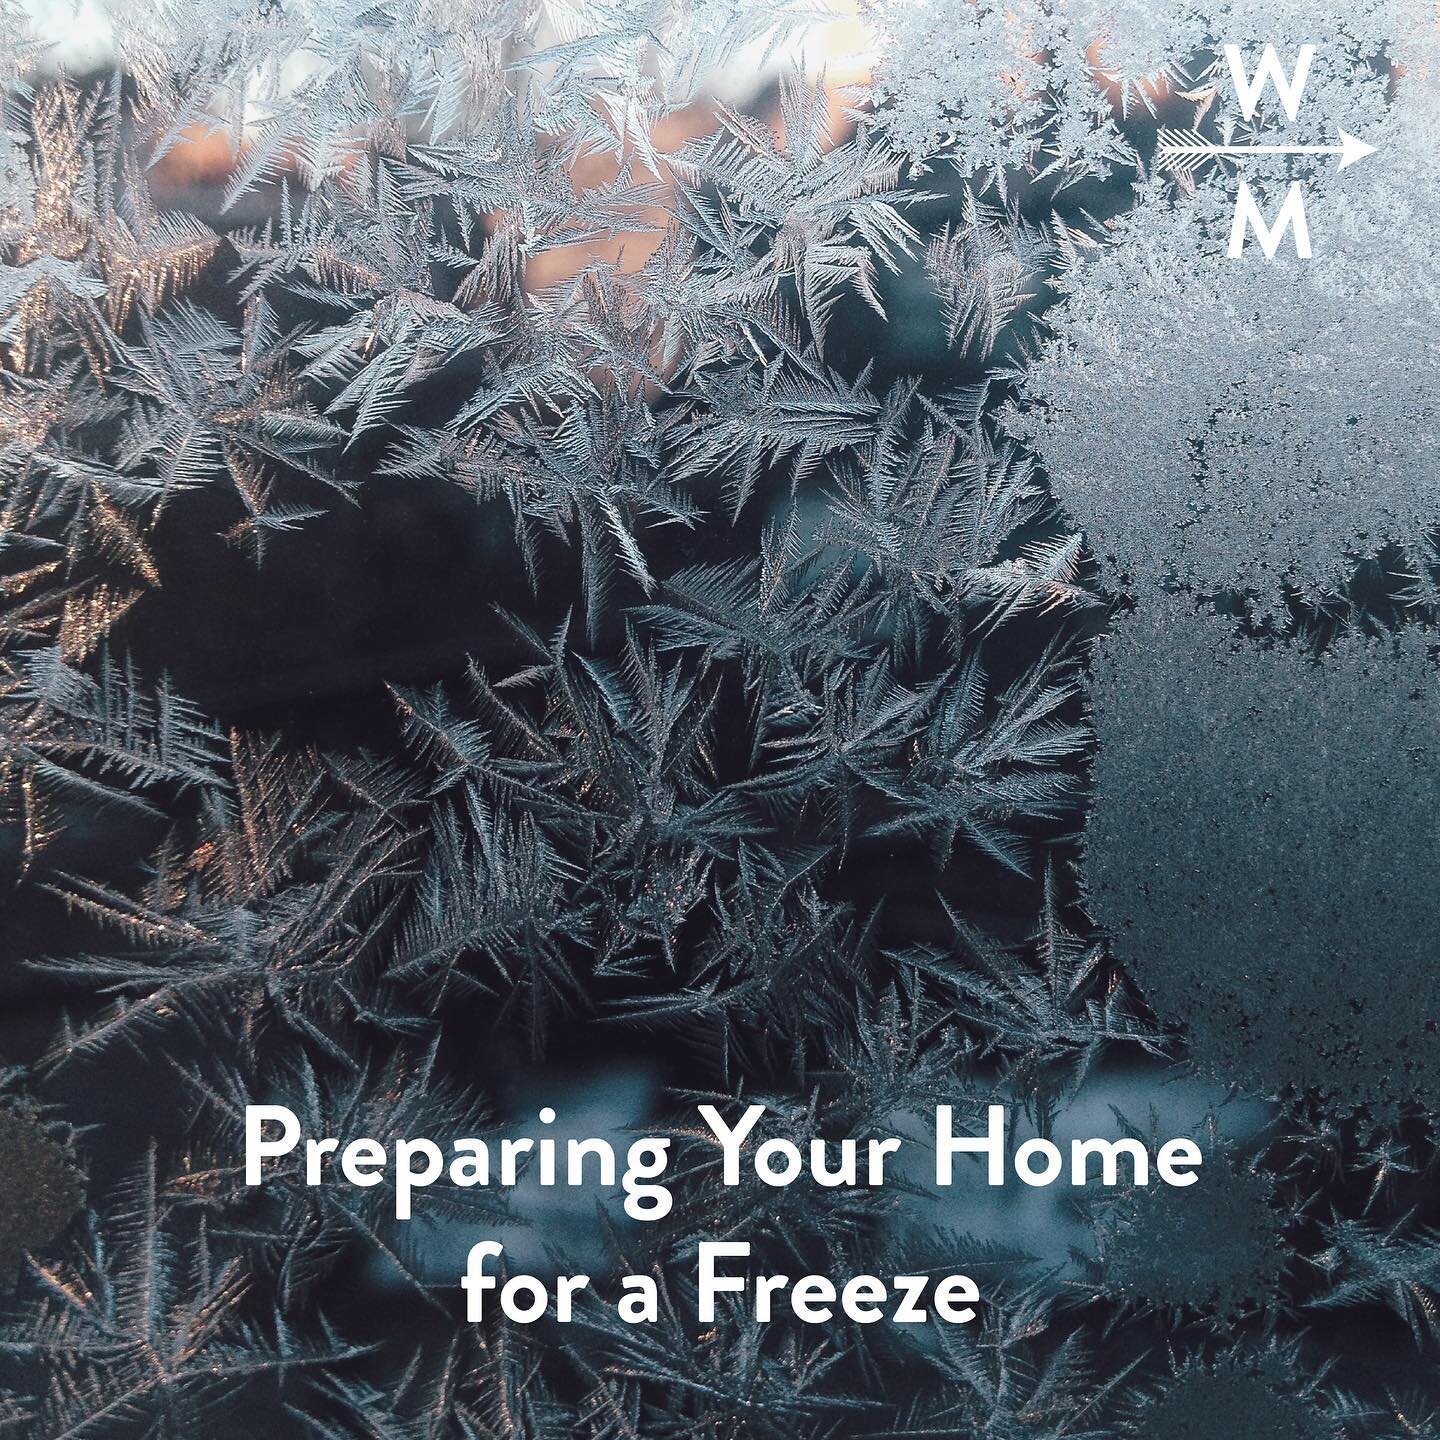 Here are a few tips to prep your home for this upcoming freeze!  Stay warm. #freeze #windchill #hometips #denver #denvercolorado #staywarm